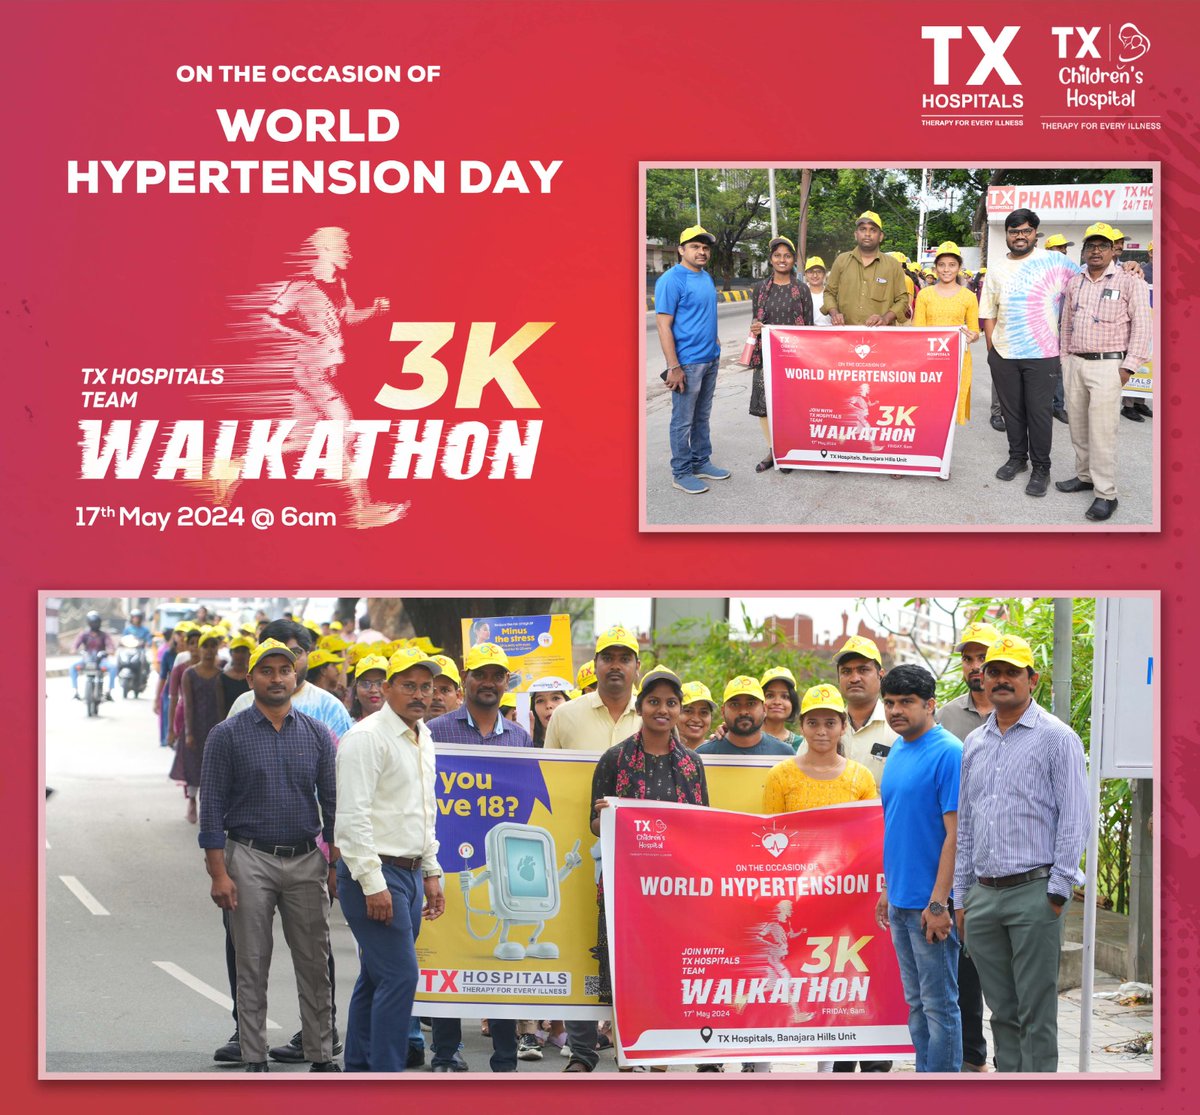 Success at the @World Hypertension Day 2024 3K Run with TX Hospitals! 🏃🎉 Together, we raised awareness and made a significant impact on hypertension health. #WorldHypertensionDay2024 #TXHospitals